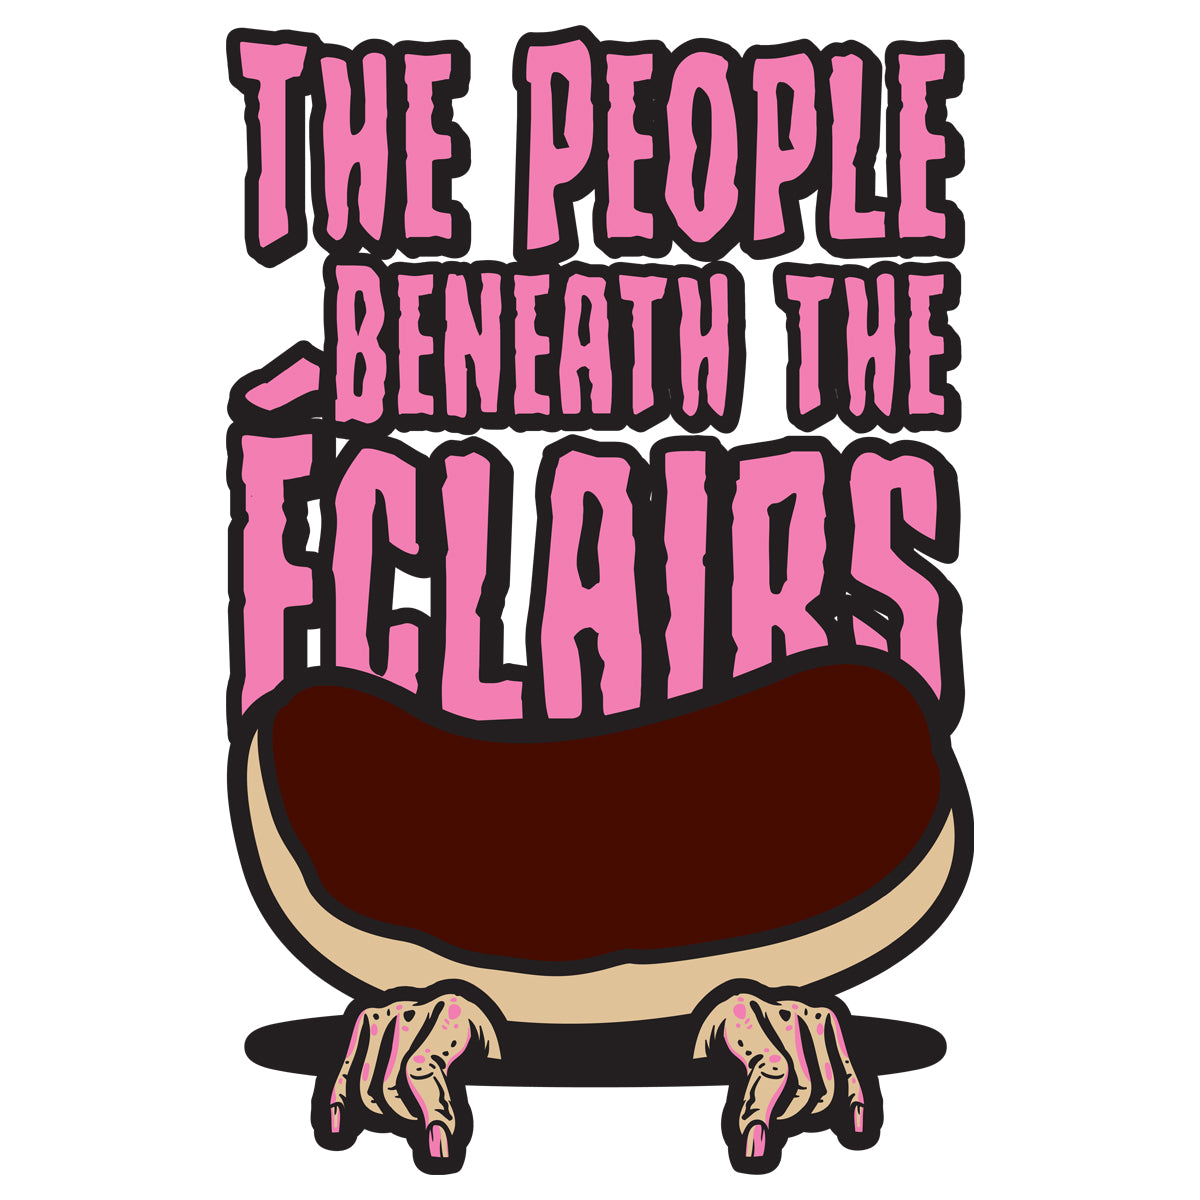 Movie The Food - The People Beneath The Eclairs - Design Detail